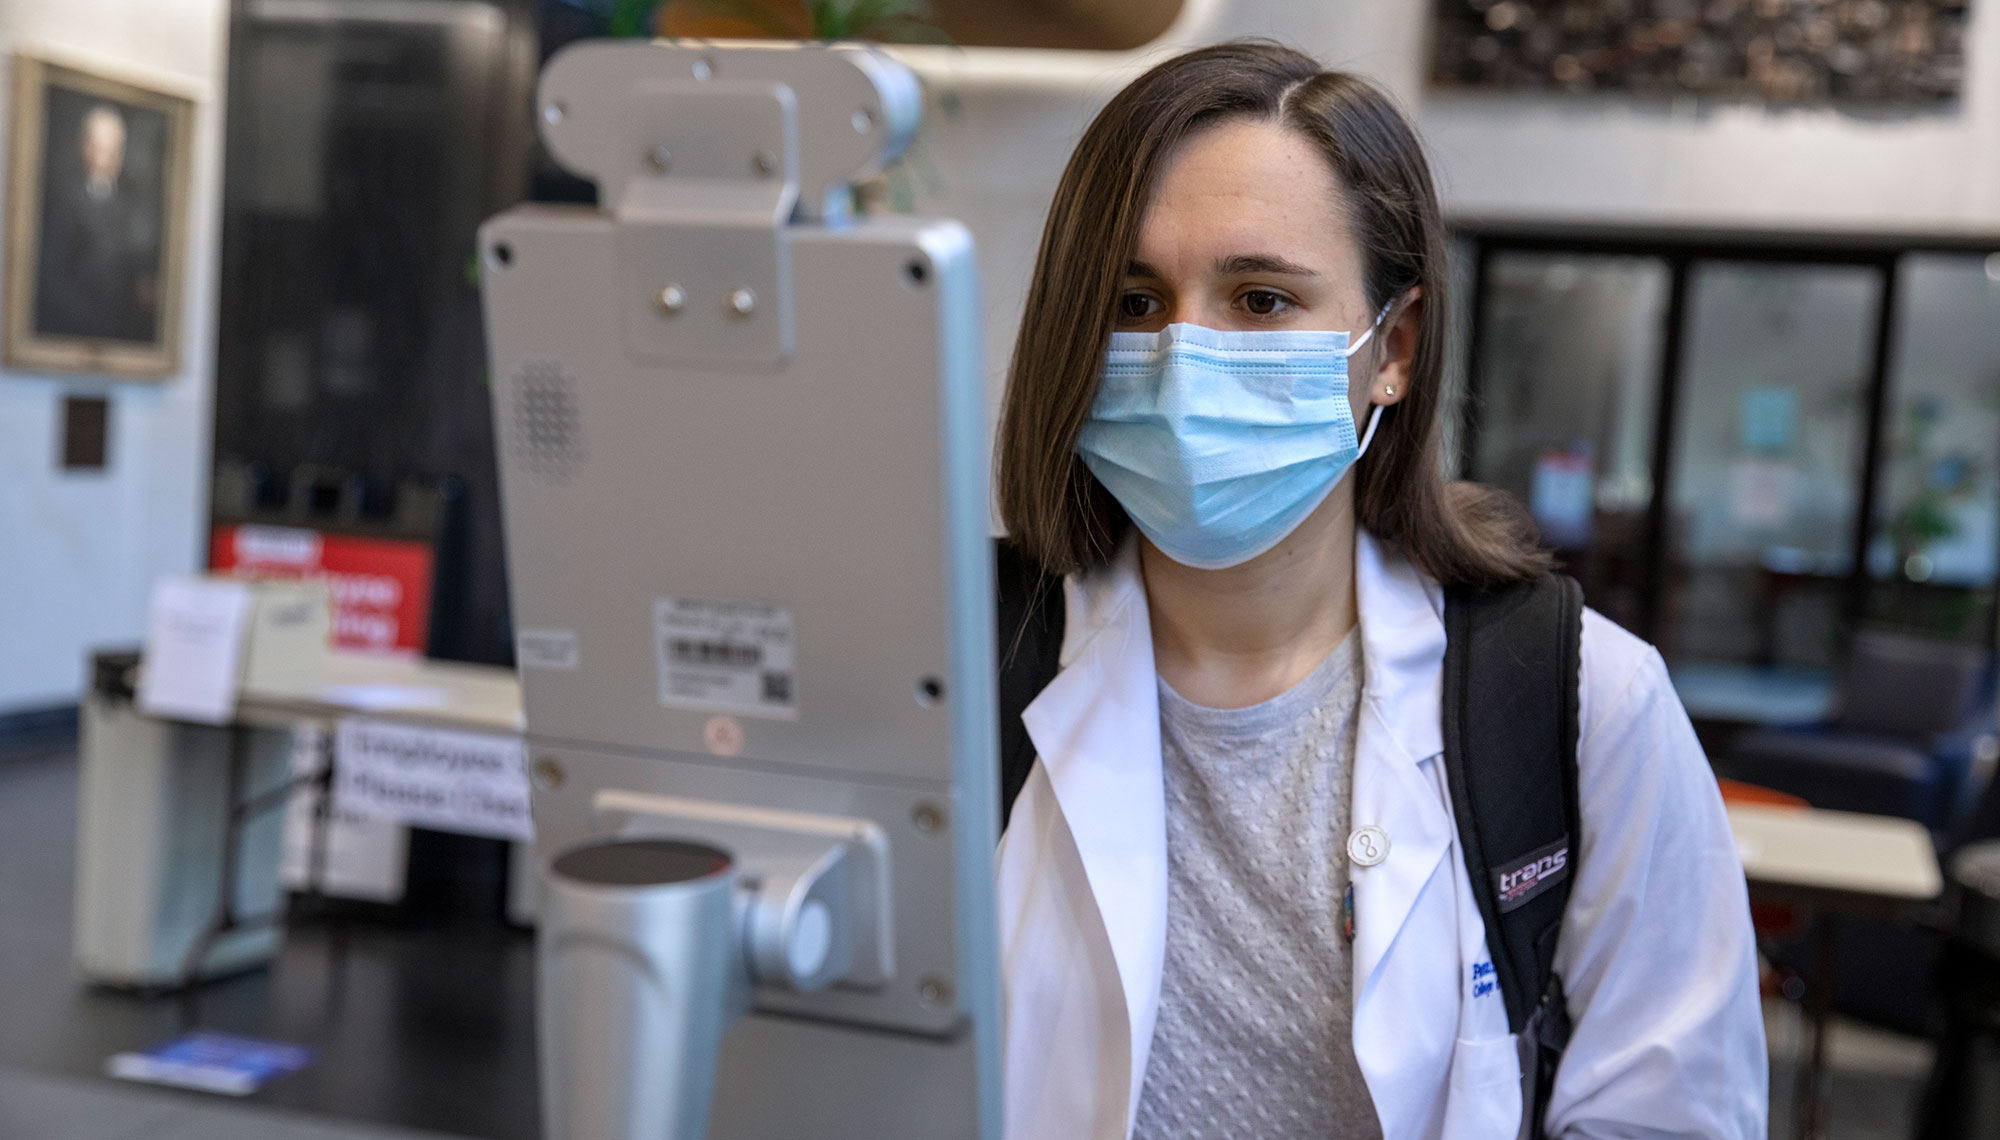 A Penn State College of Medicine student uses an automated, touchless temperature scanner before entering the building due to COVID-19.